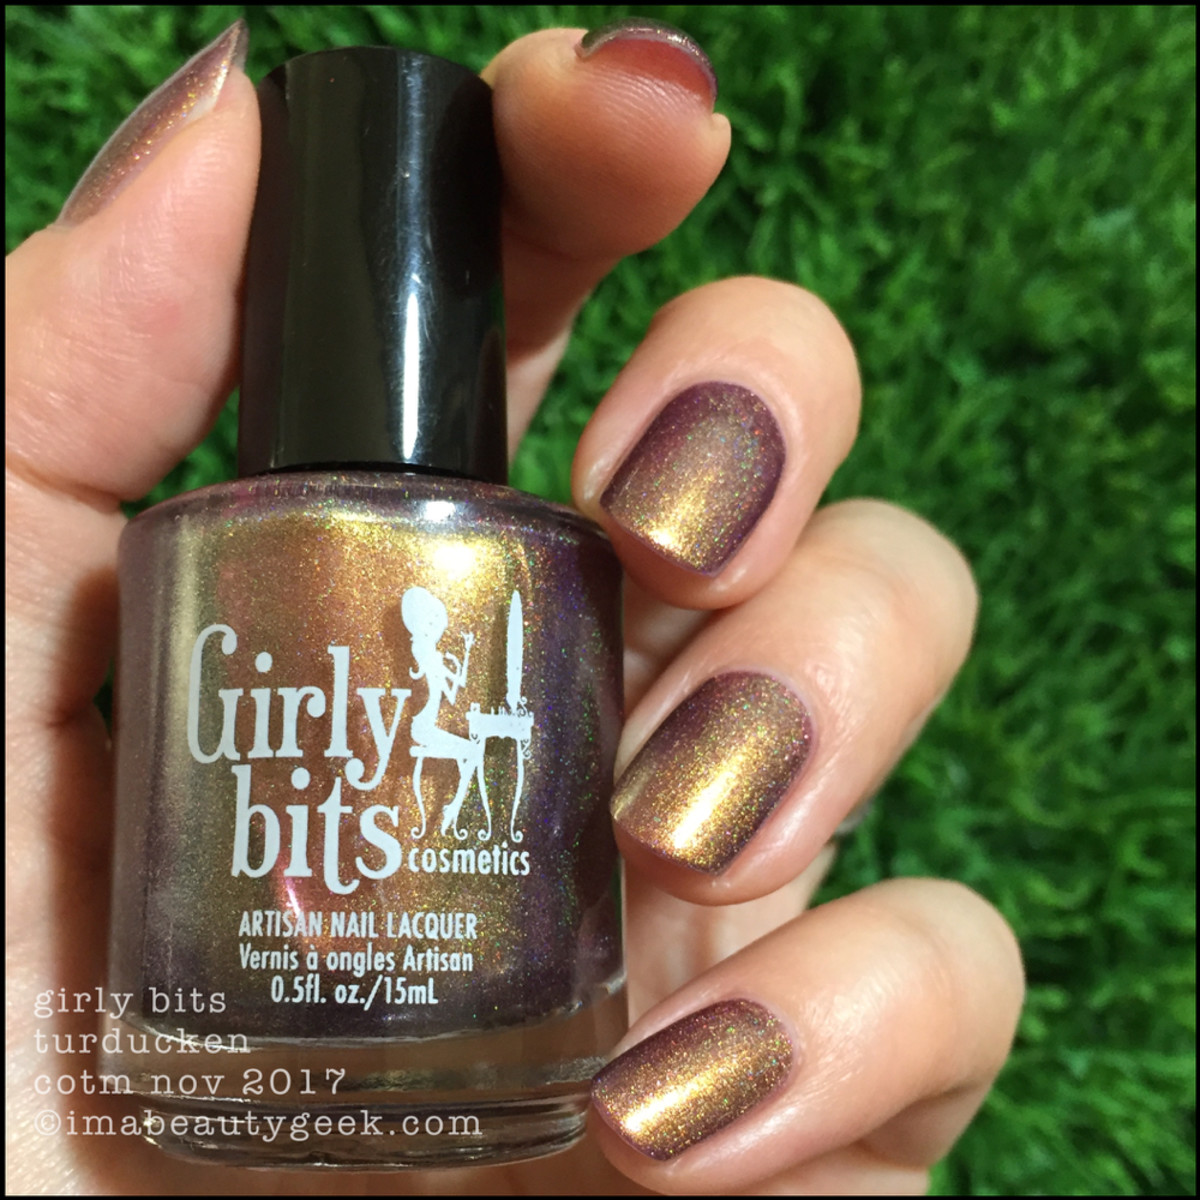 Girly Bits Turducken COTM 2 _ Girly Bits LE Colour of the Month Nov 2017